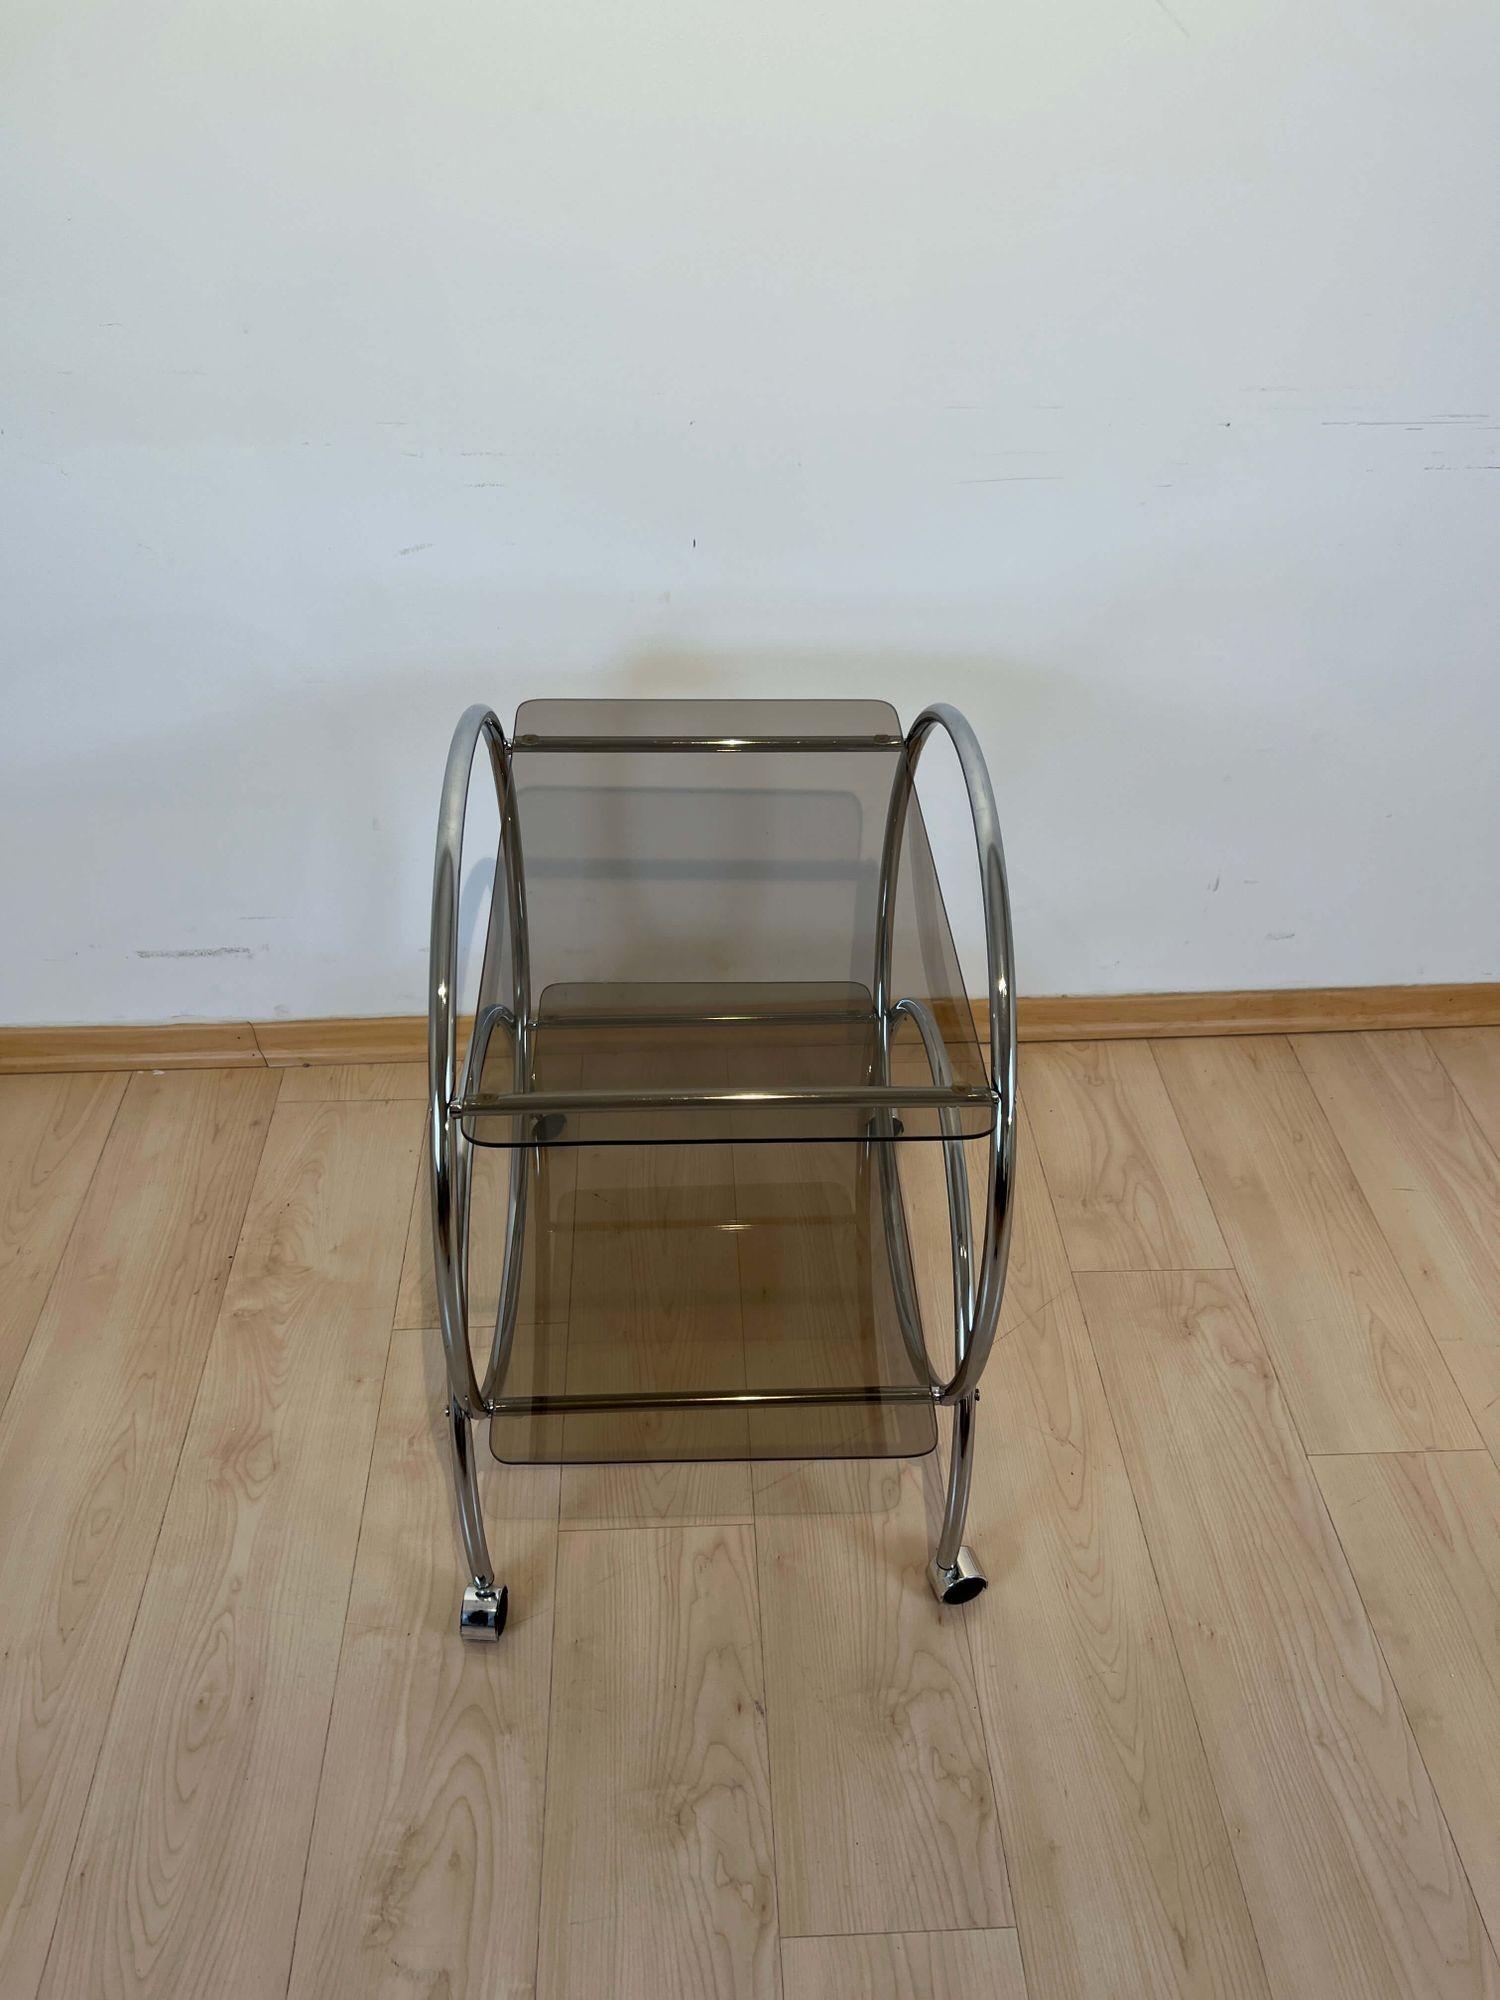 Art Deco Style Serving Trolley or Bar Cart, Chrome and Glass, Germany circa 1970 For Sale 1